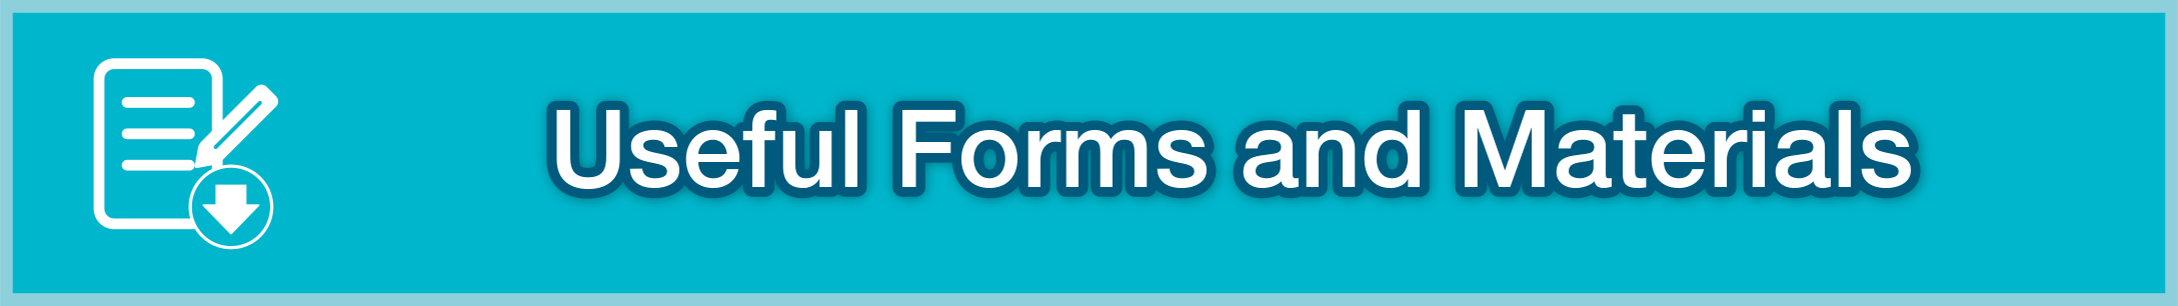 Useful Forms and Materials